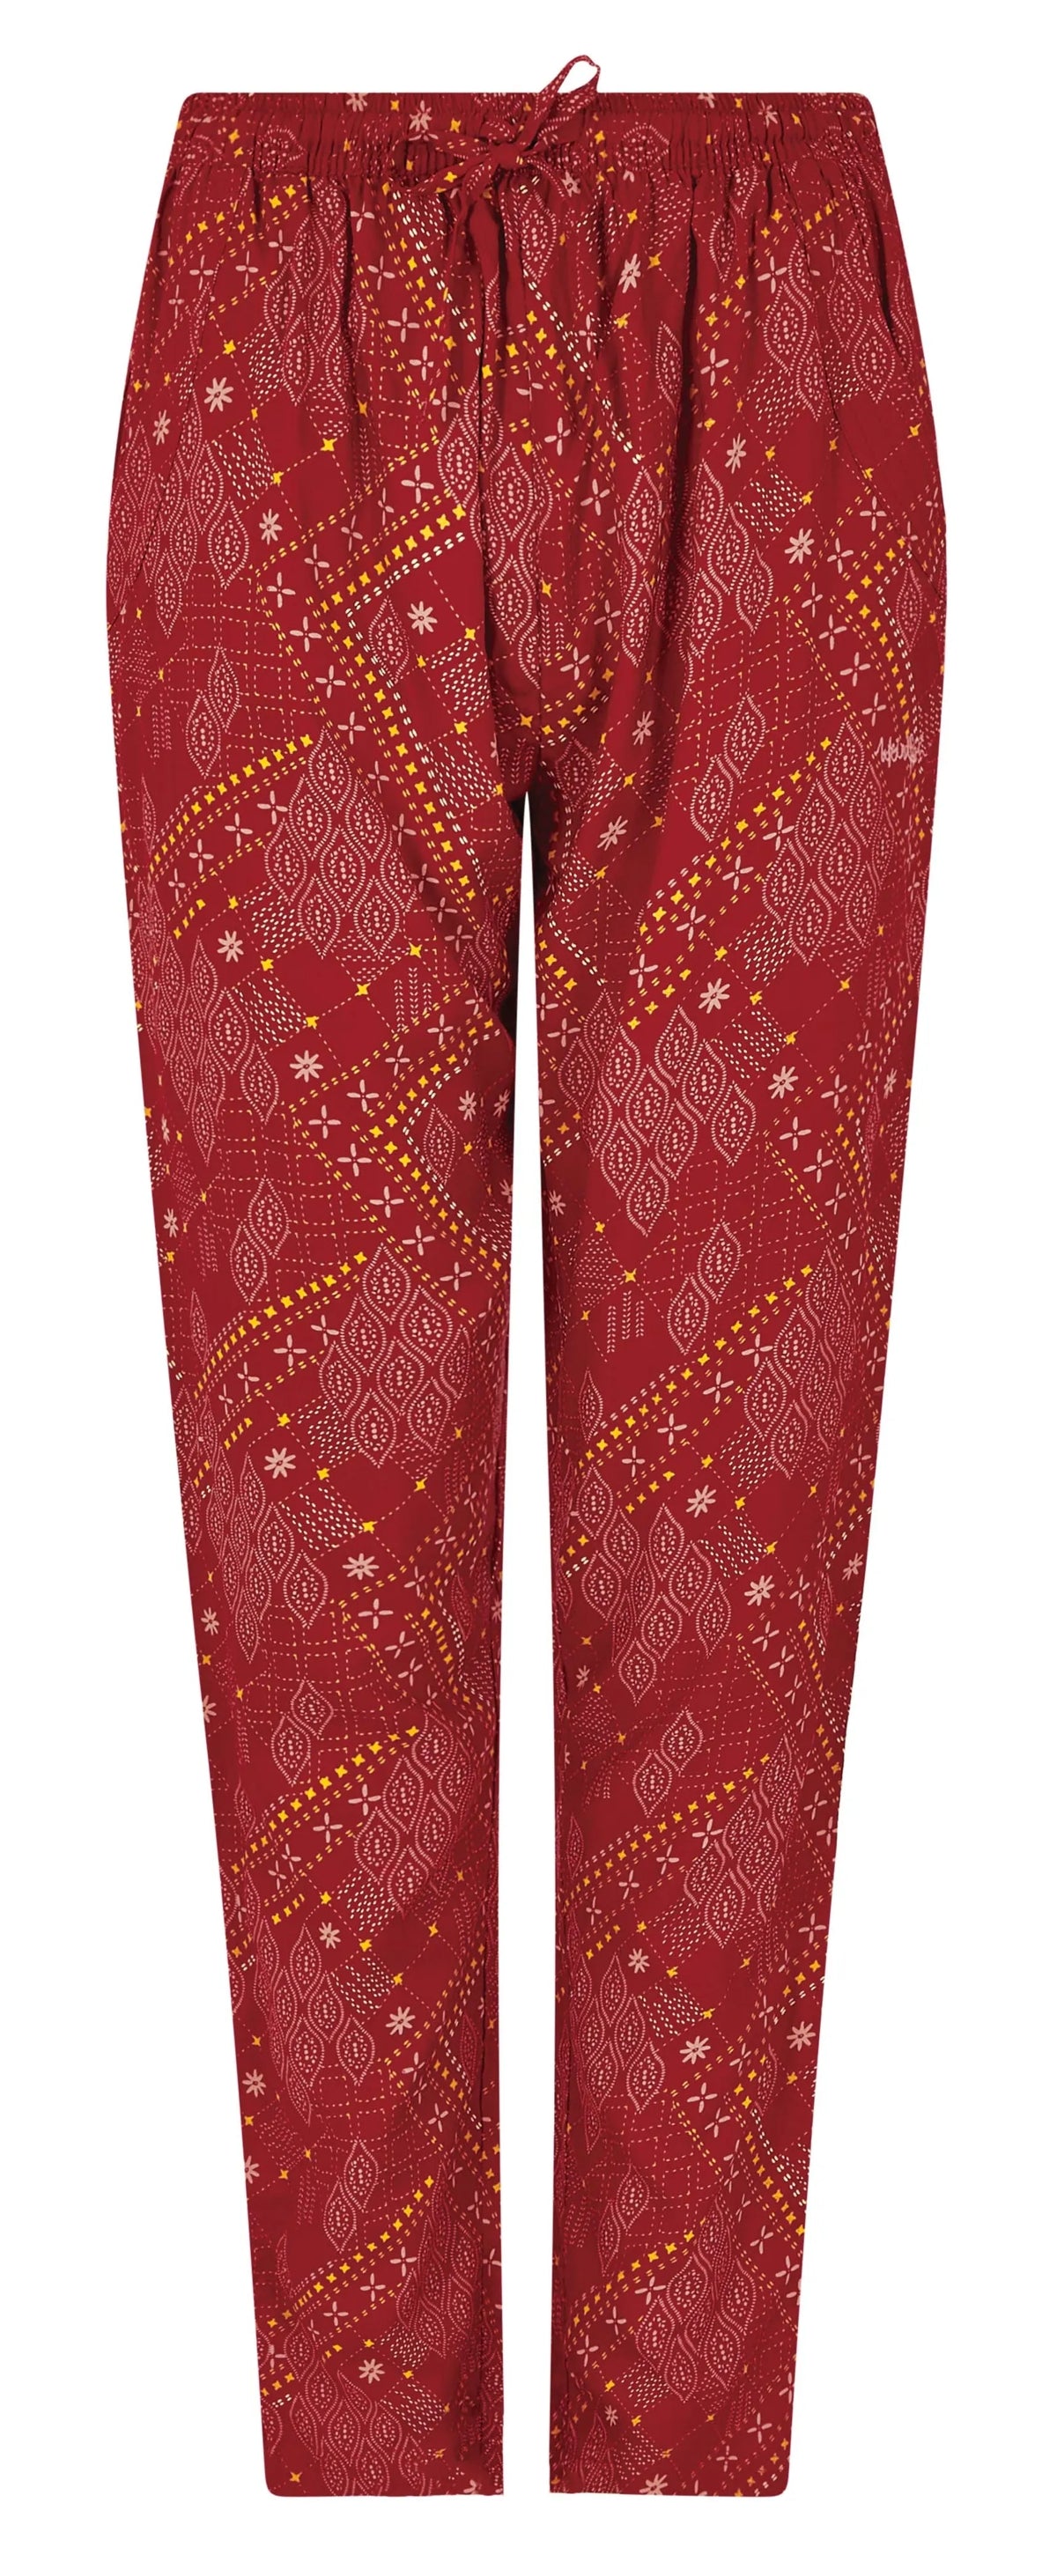 Women's Tinto lightwight viscose trousers from Weird Fish in Chilli Red with a Moroccan style print.